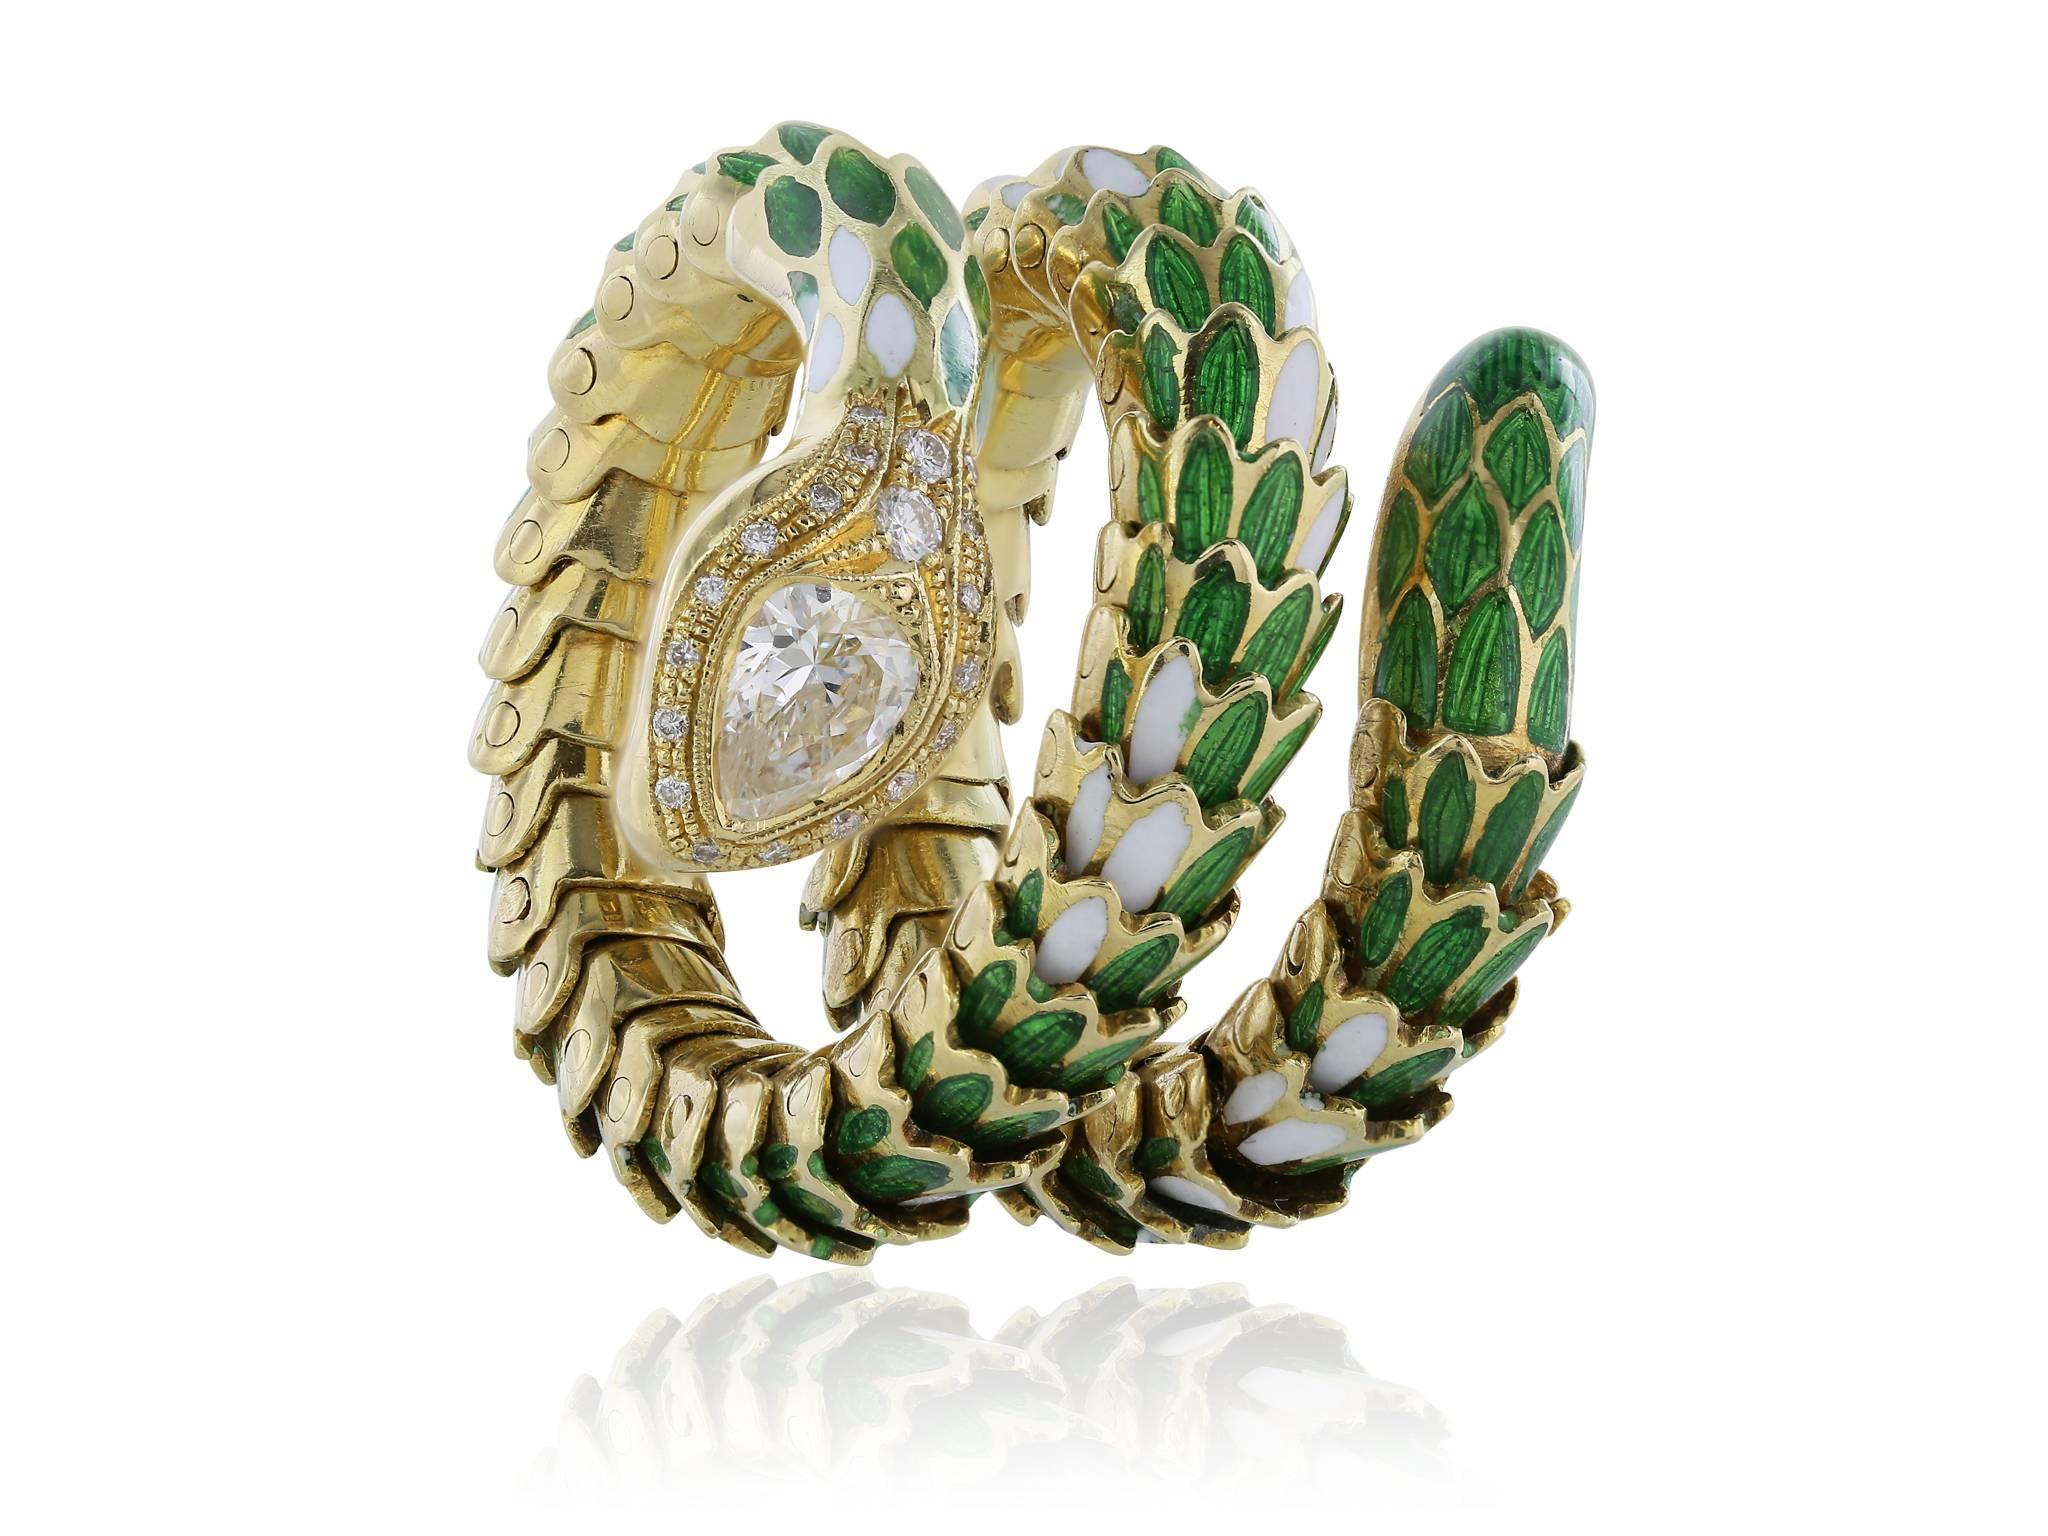 18 karat yellow gold flexible snake ring, featuring enamel green and white coiling scales, with a pear shape diamond bezel set, approximately 0.57 carats G-H color, VS1, VS2 clarity and surrounded by 19 pave round diamonds with an approximately